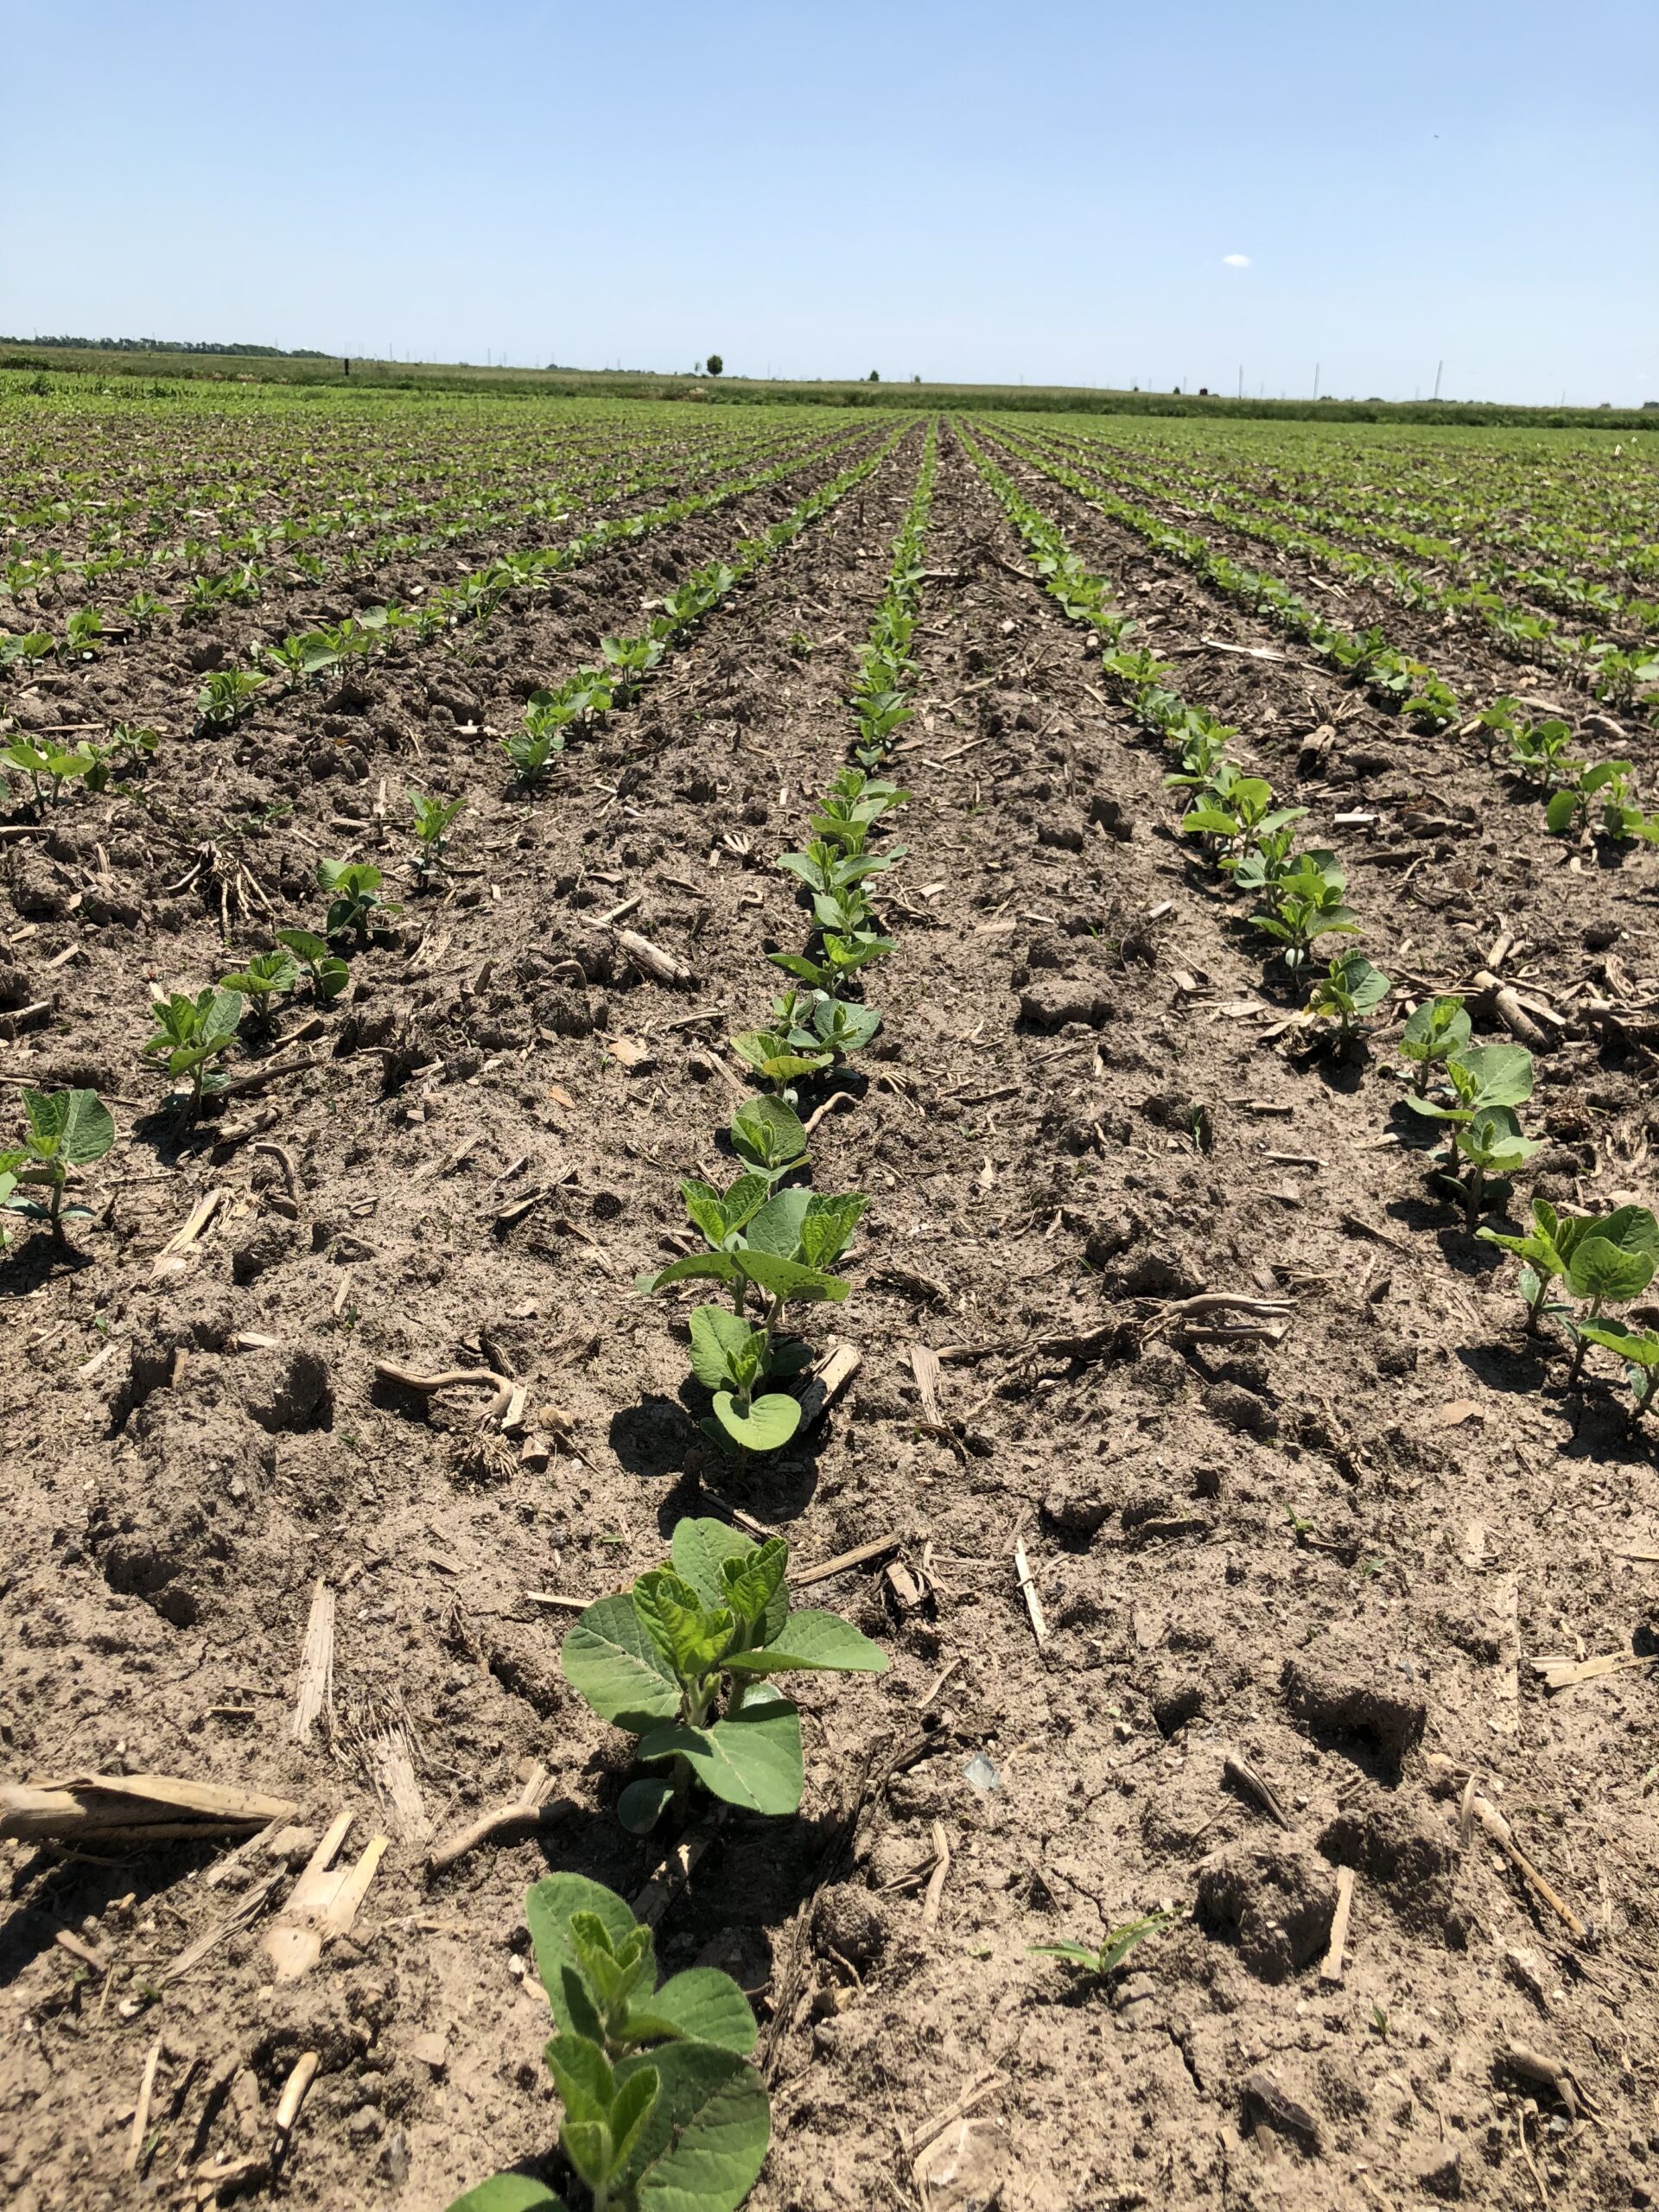 Notes on soybeans as planting gets underway